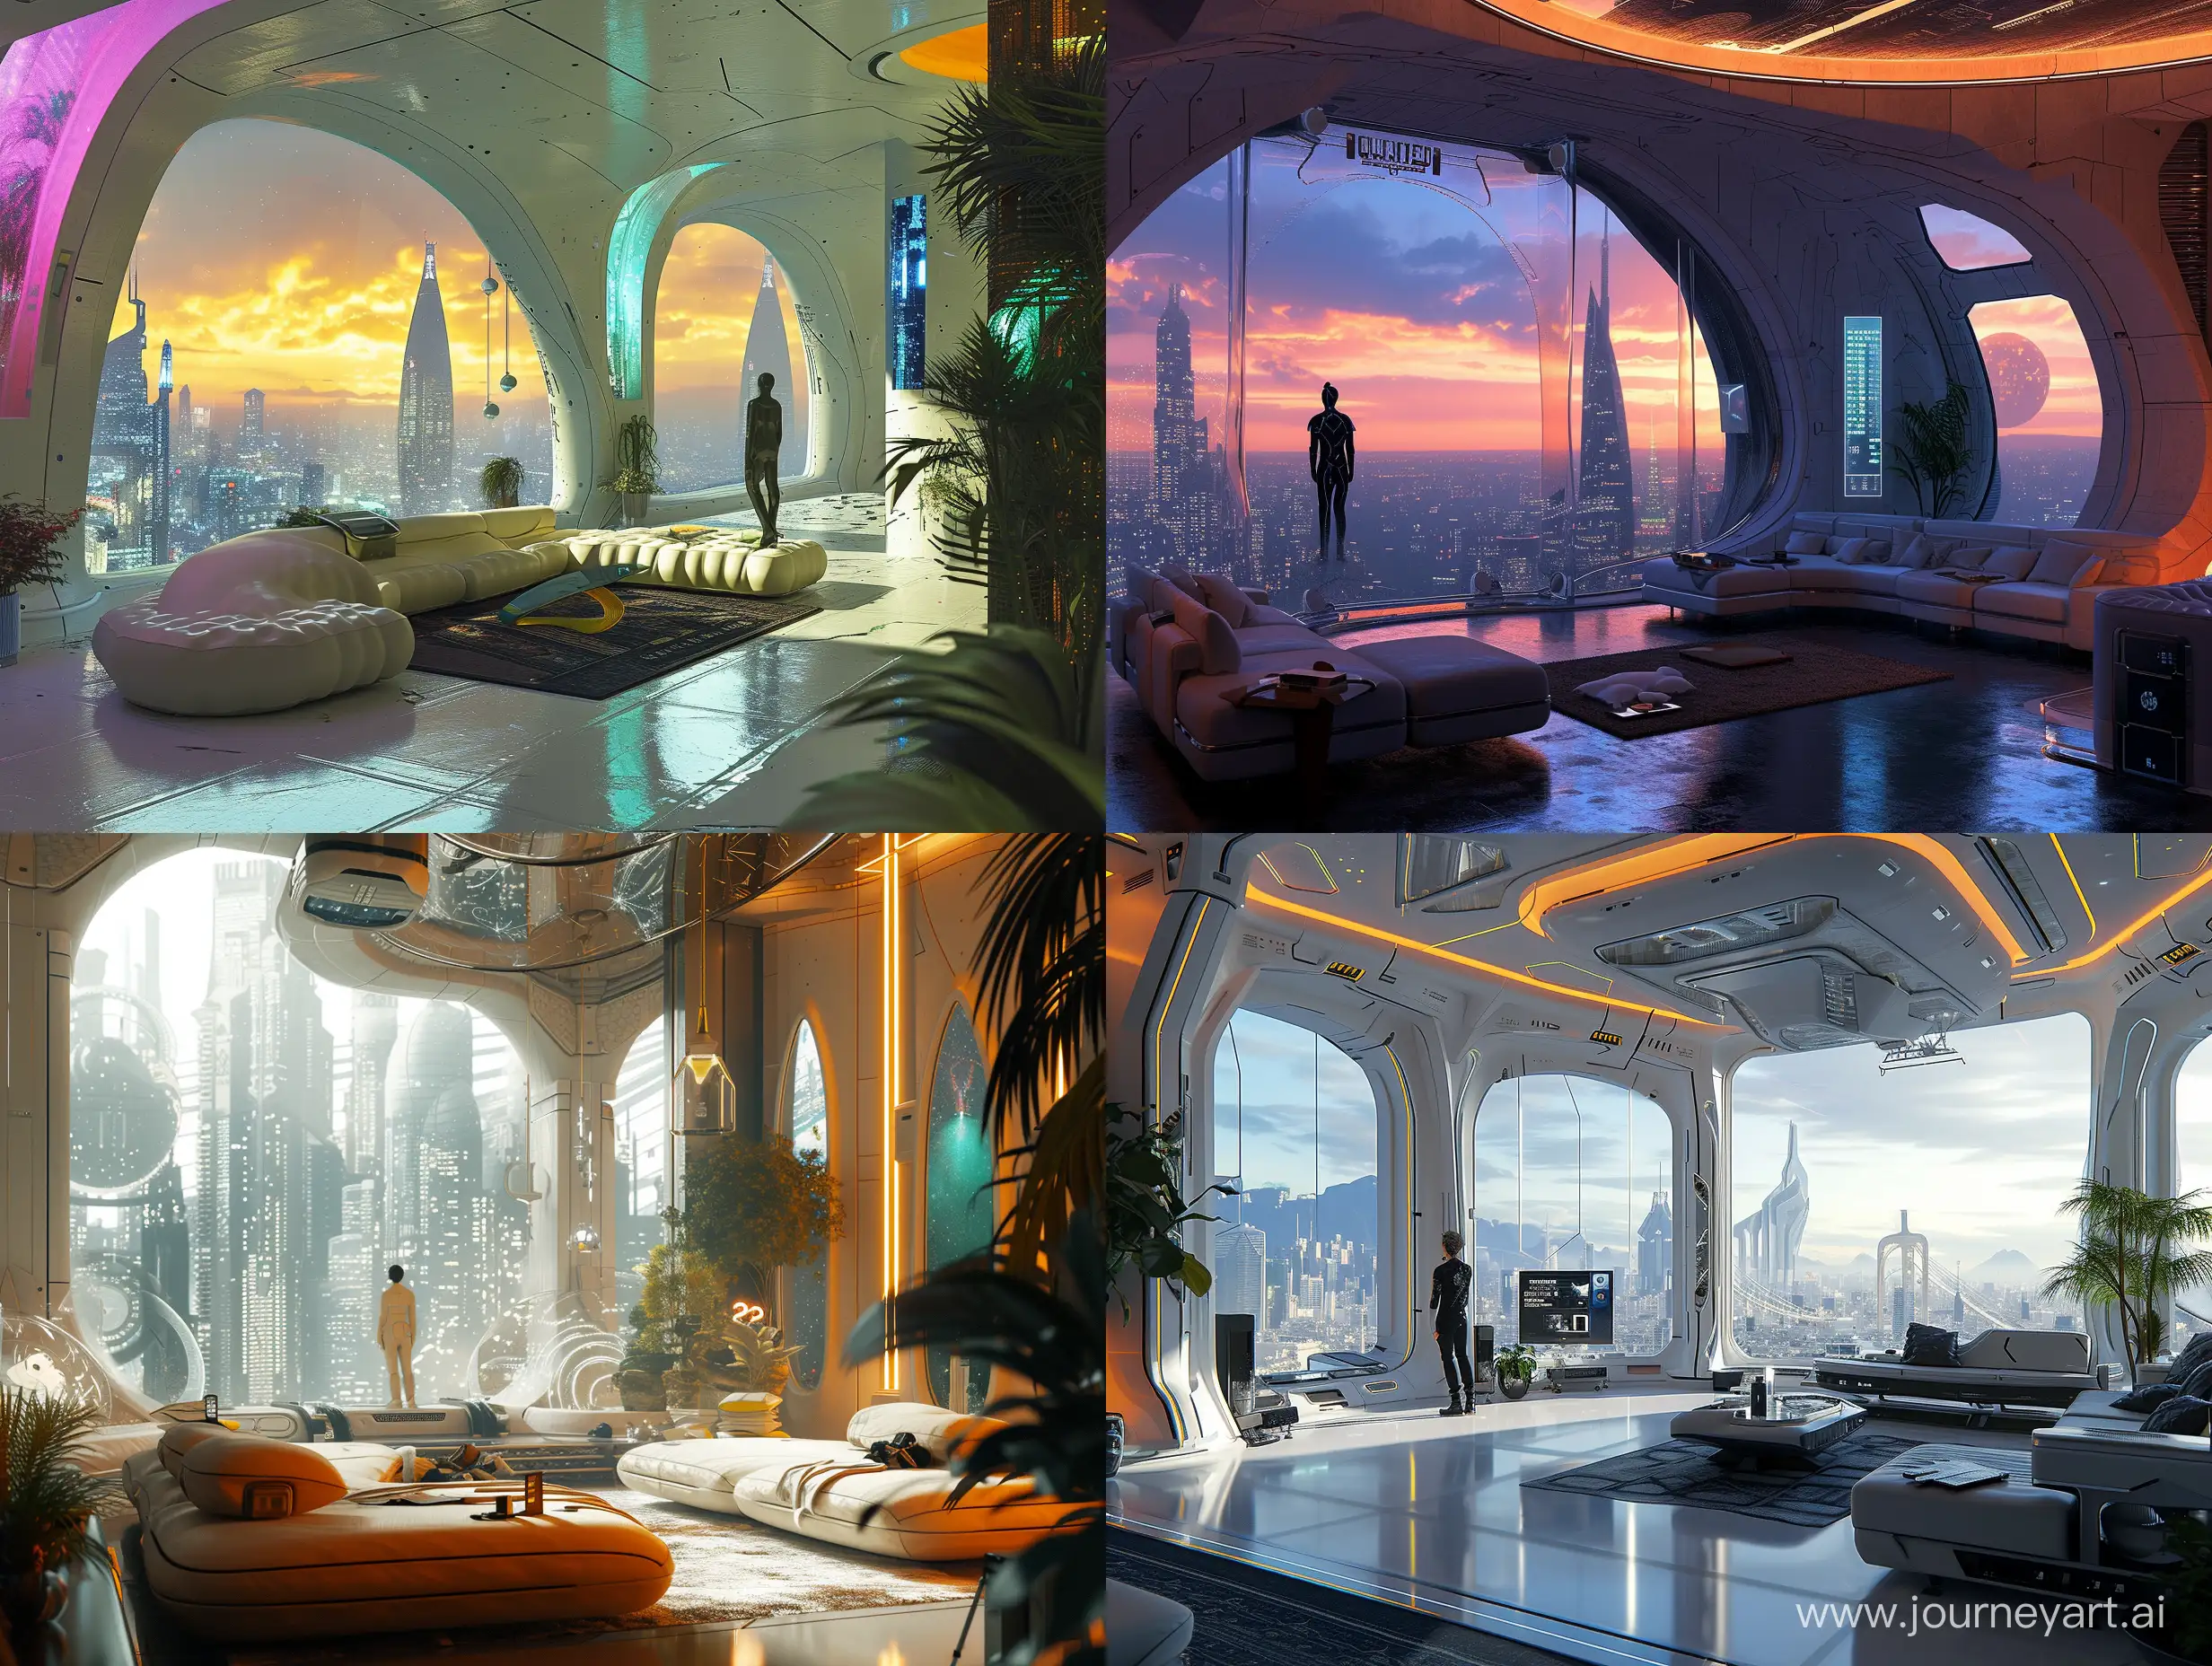 The living room features a modern design with a futuristic Y2K aesthetic and a variety of themes that showcase its unique architecture and atmosphere. It offers a peaceful setting, busy city, a person standing up
